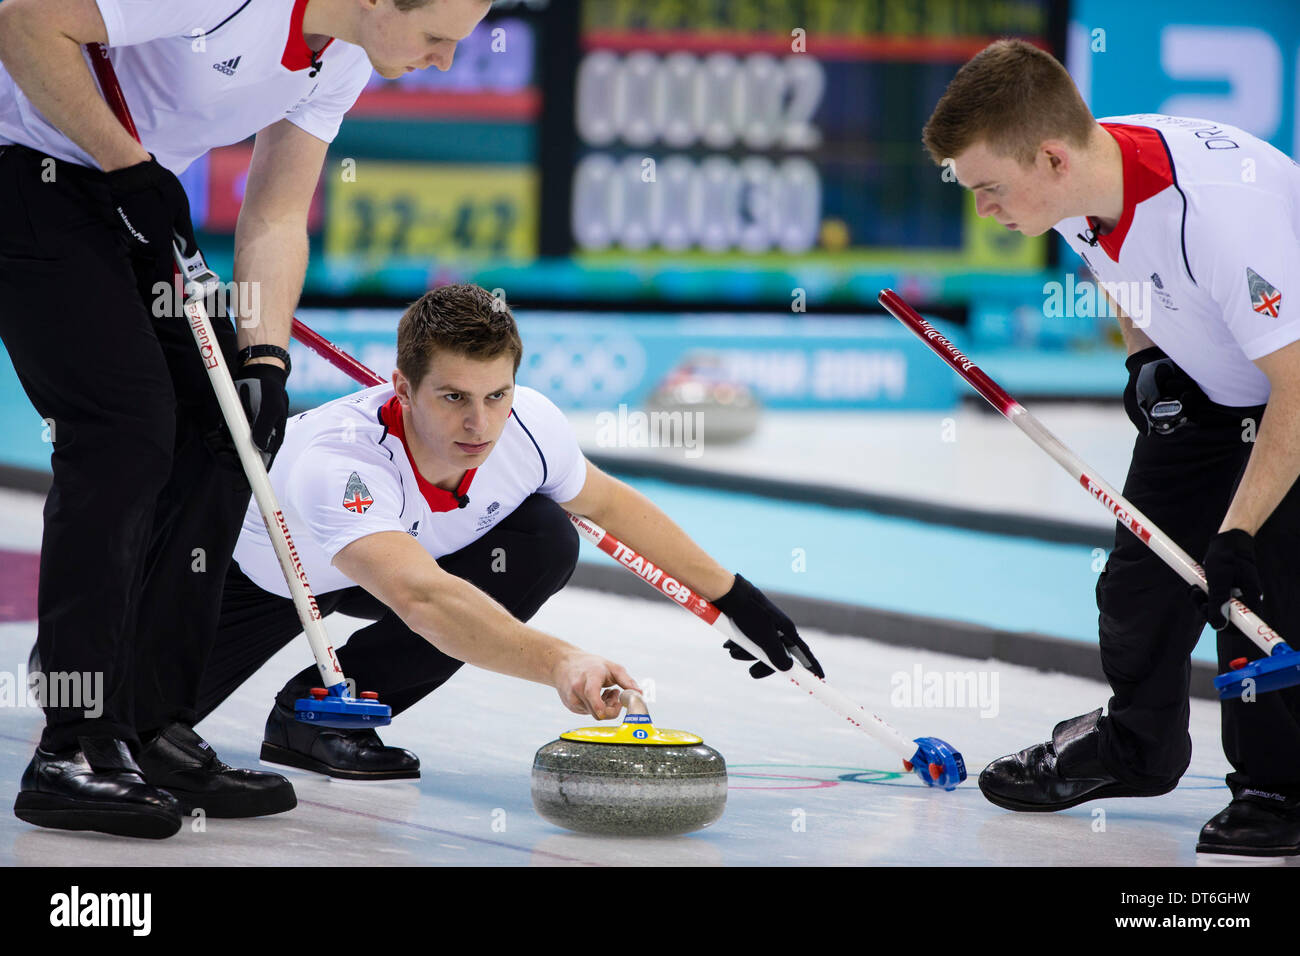 Sochi, Krasnodar Krai, Russia. 10th Feb, 2014. Great Britain's Scott ANDREWS delivers a stone during the Men's Curling round robin match between Great Britain and Sweden at the Ice Cube Curling Centre - XXII Olympic Winter Game Credit:  Action Plus Sports/Alamy Live News Stock Photo